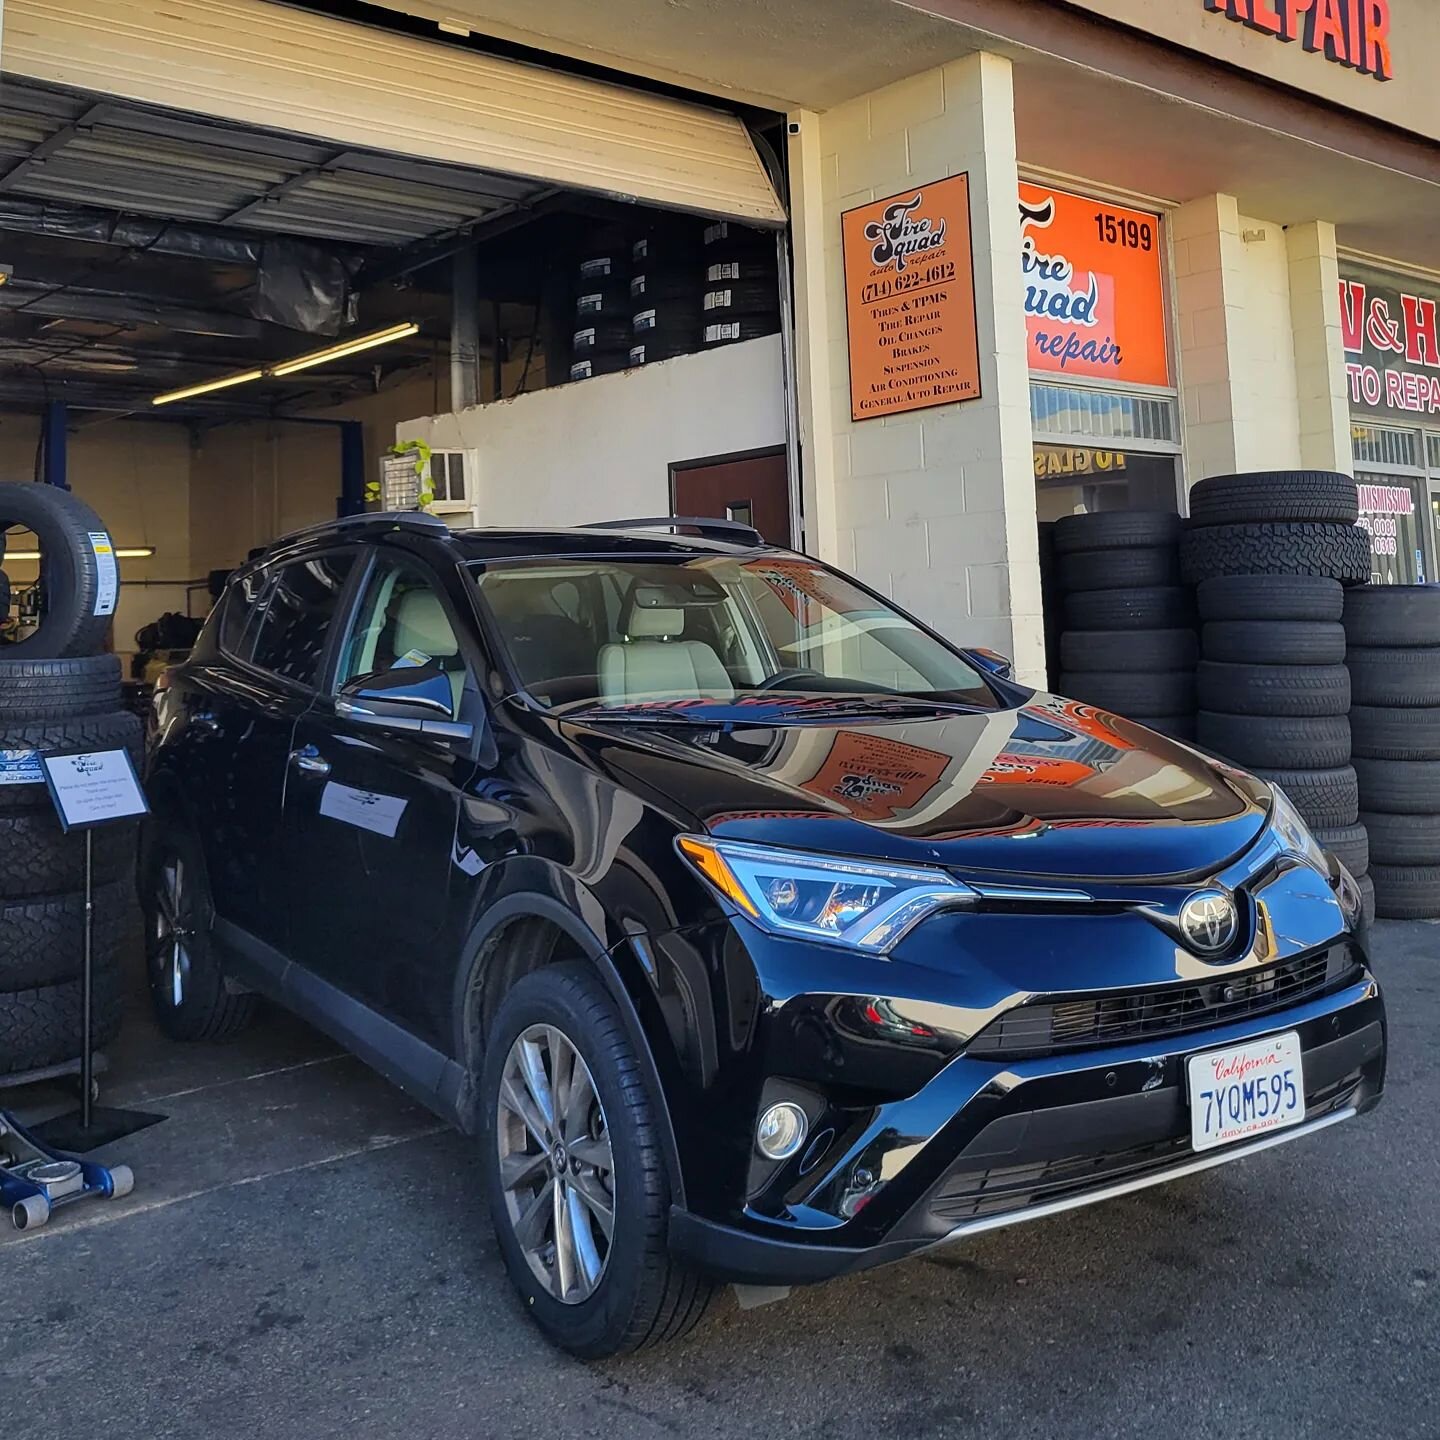 New year, new tires! 2017 RAV4 starting the new year off right with 4 brand new tires. #tiresquad #tiresquadwestminster